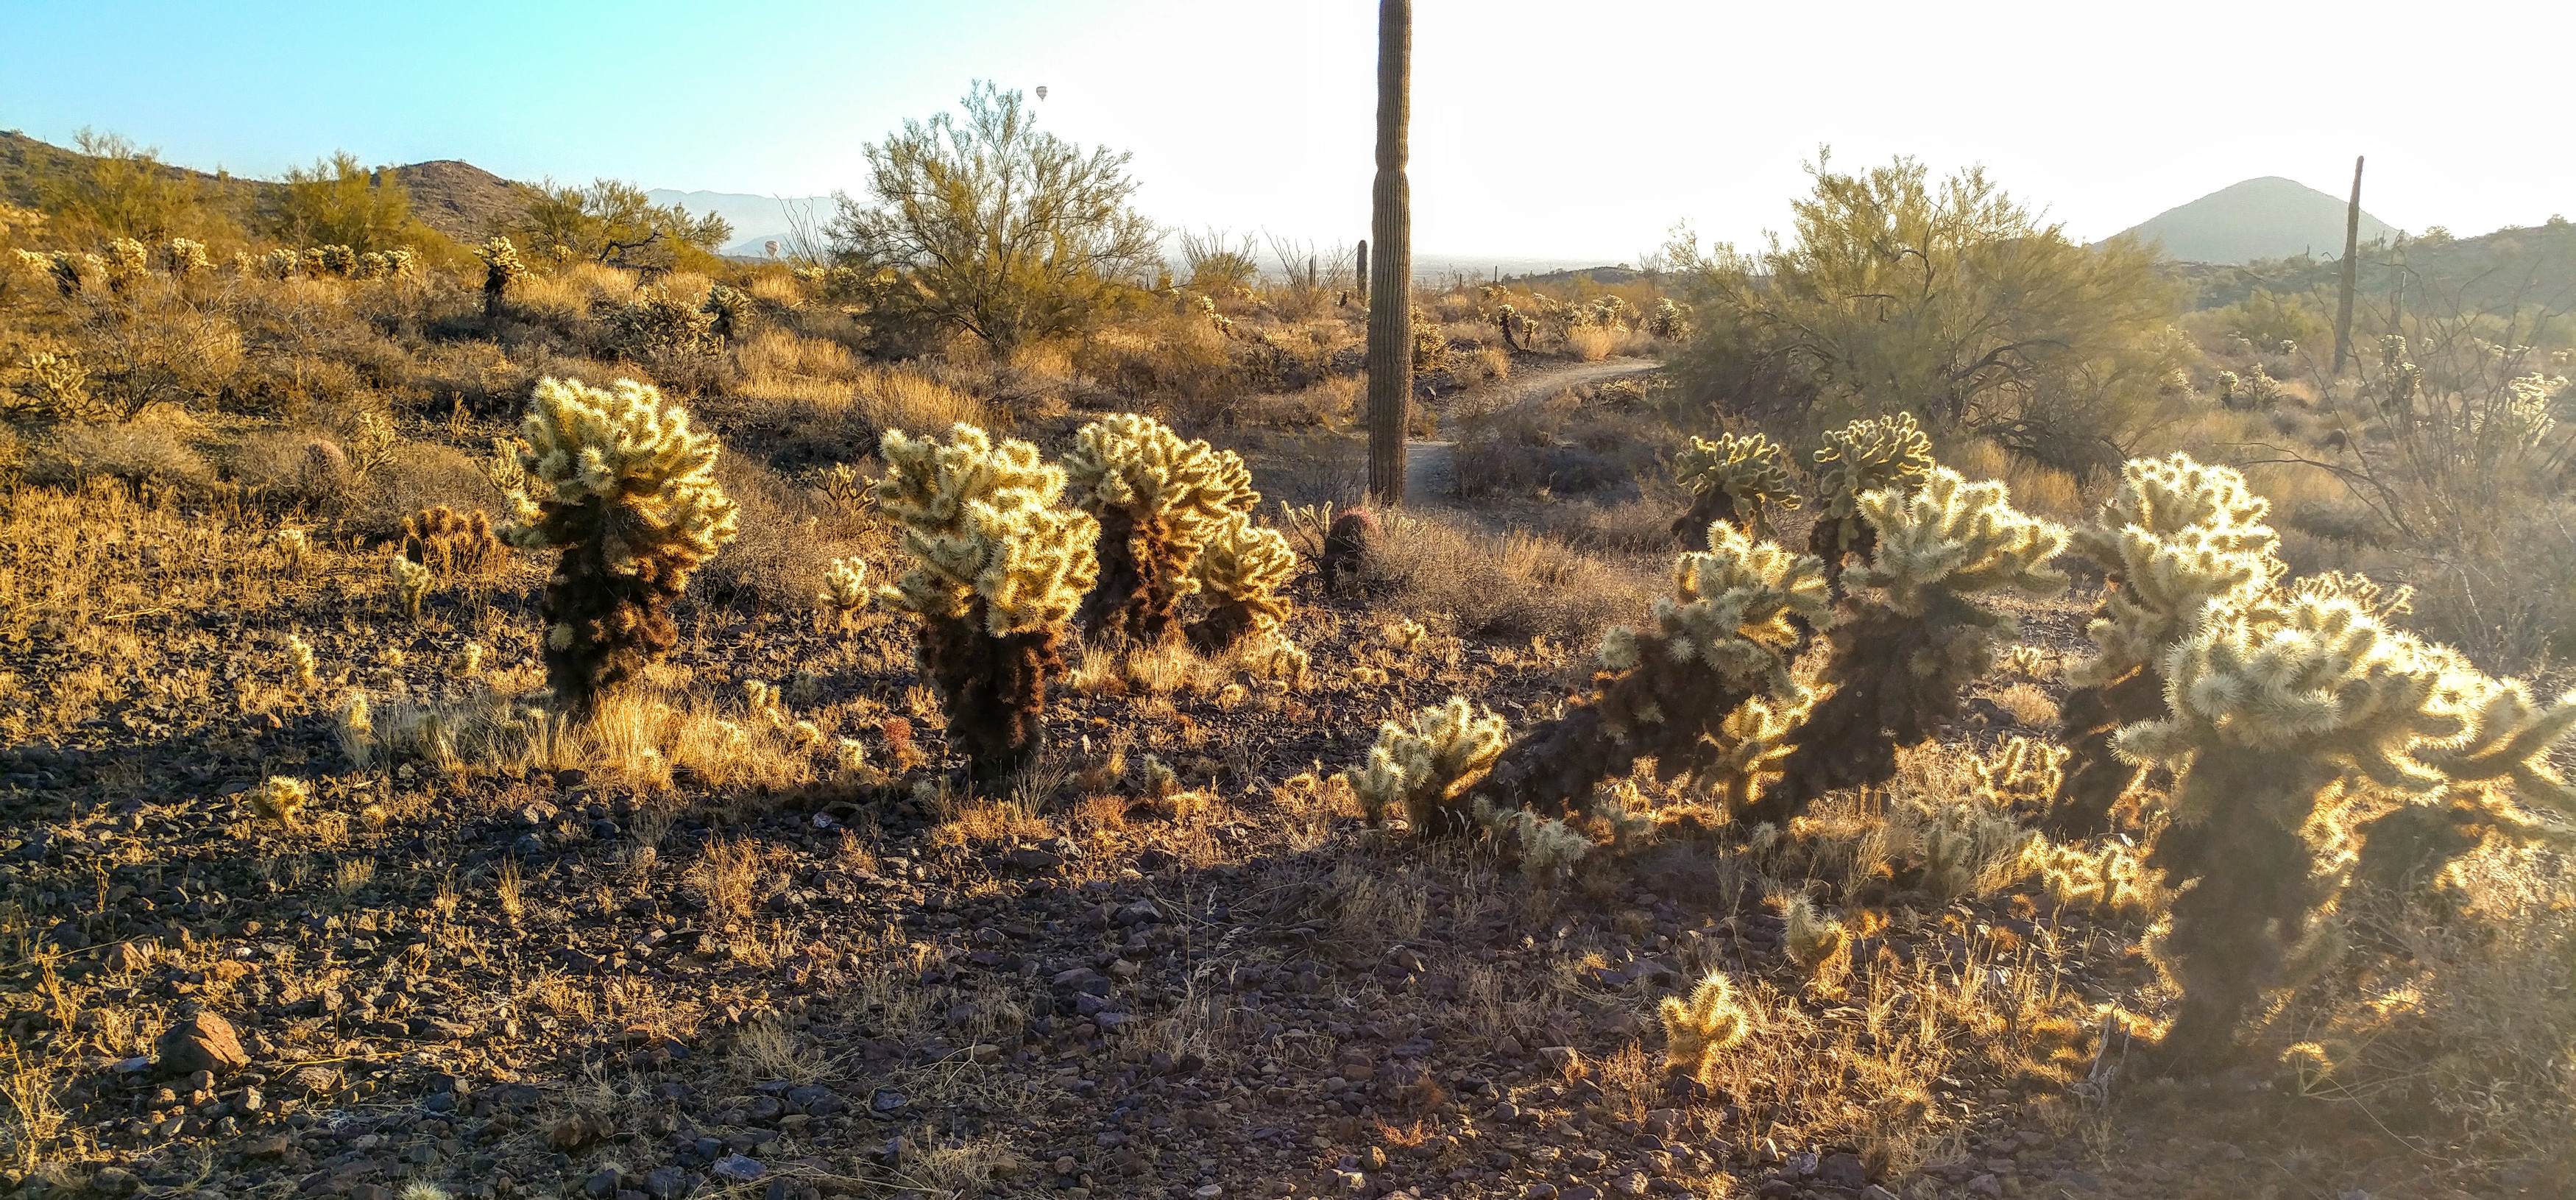 cactus on the trail